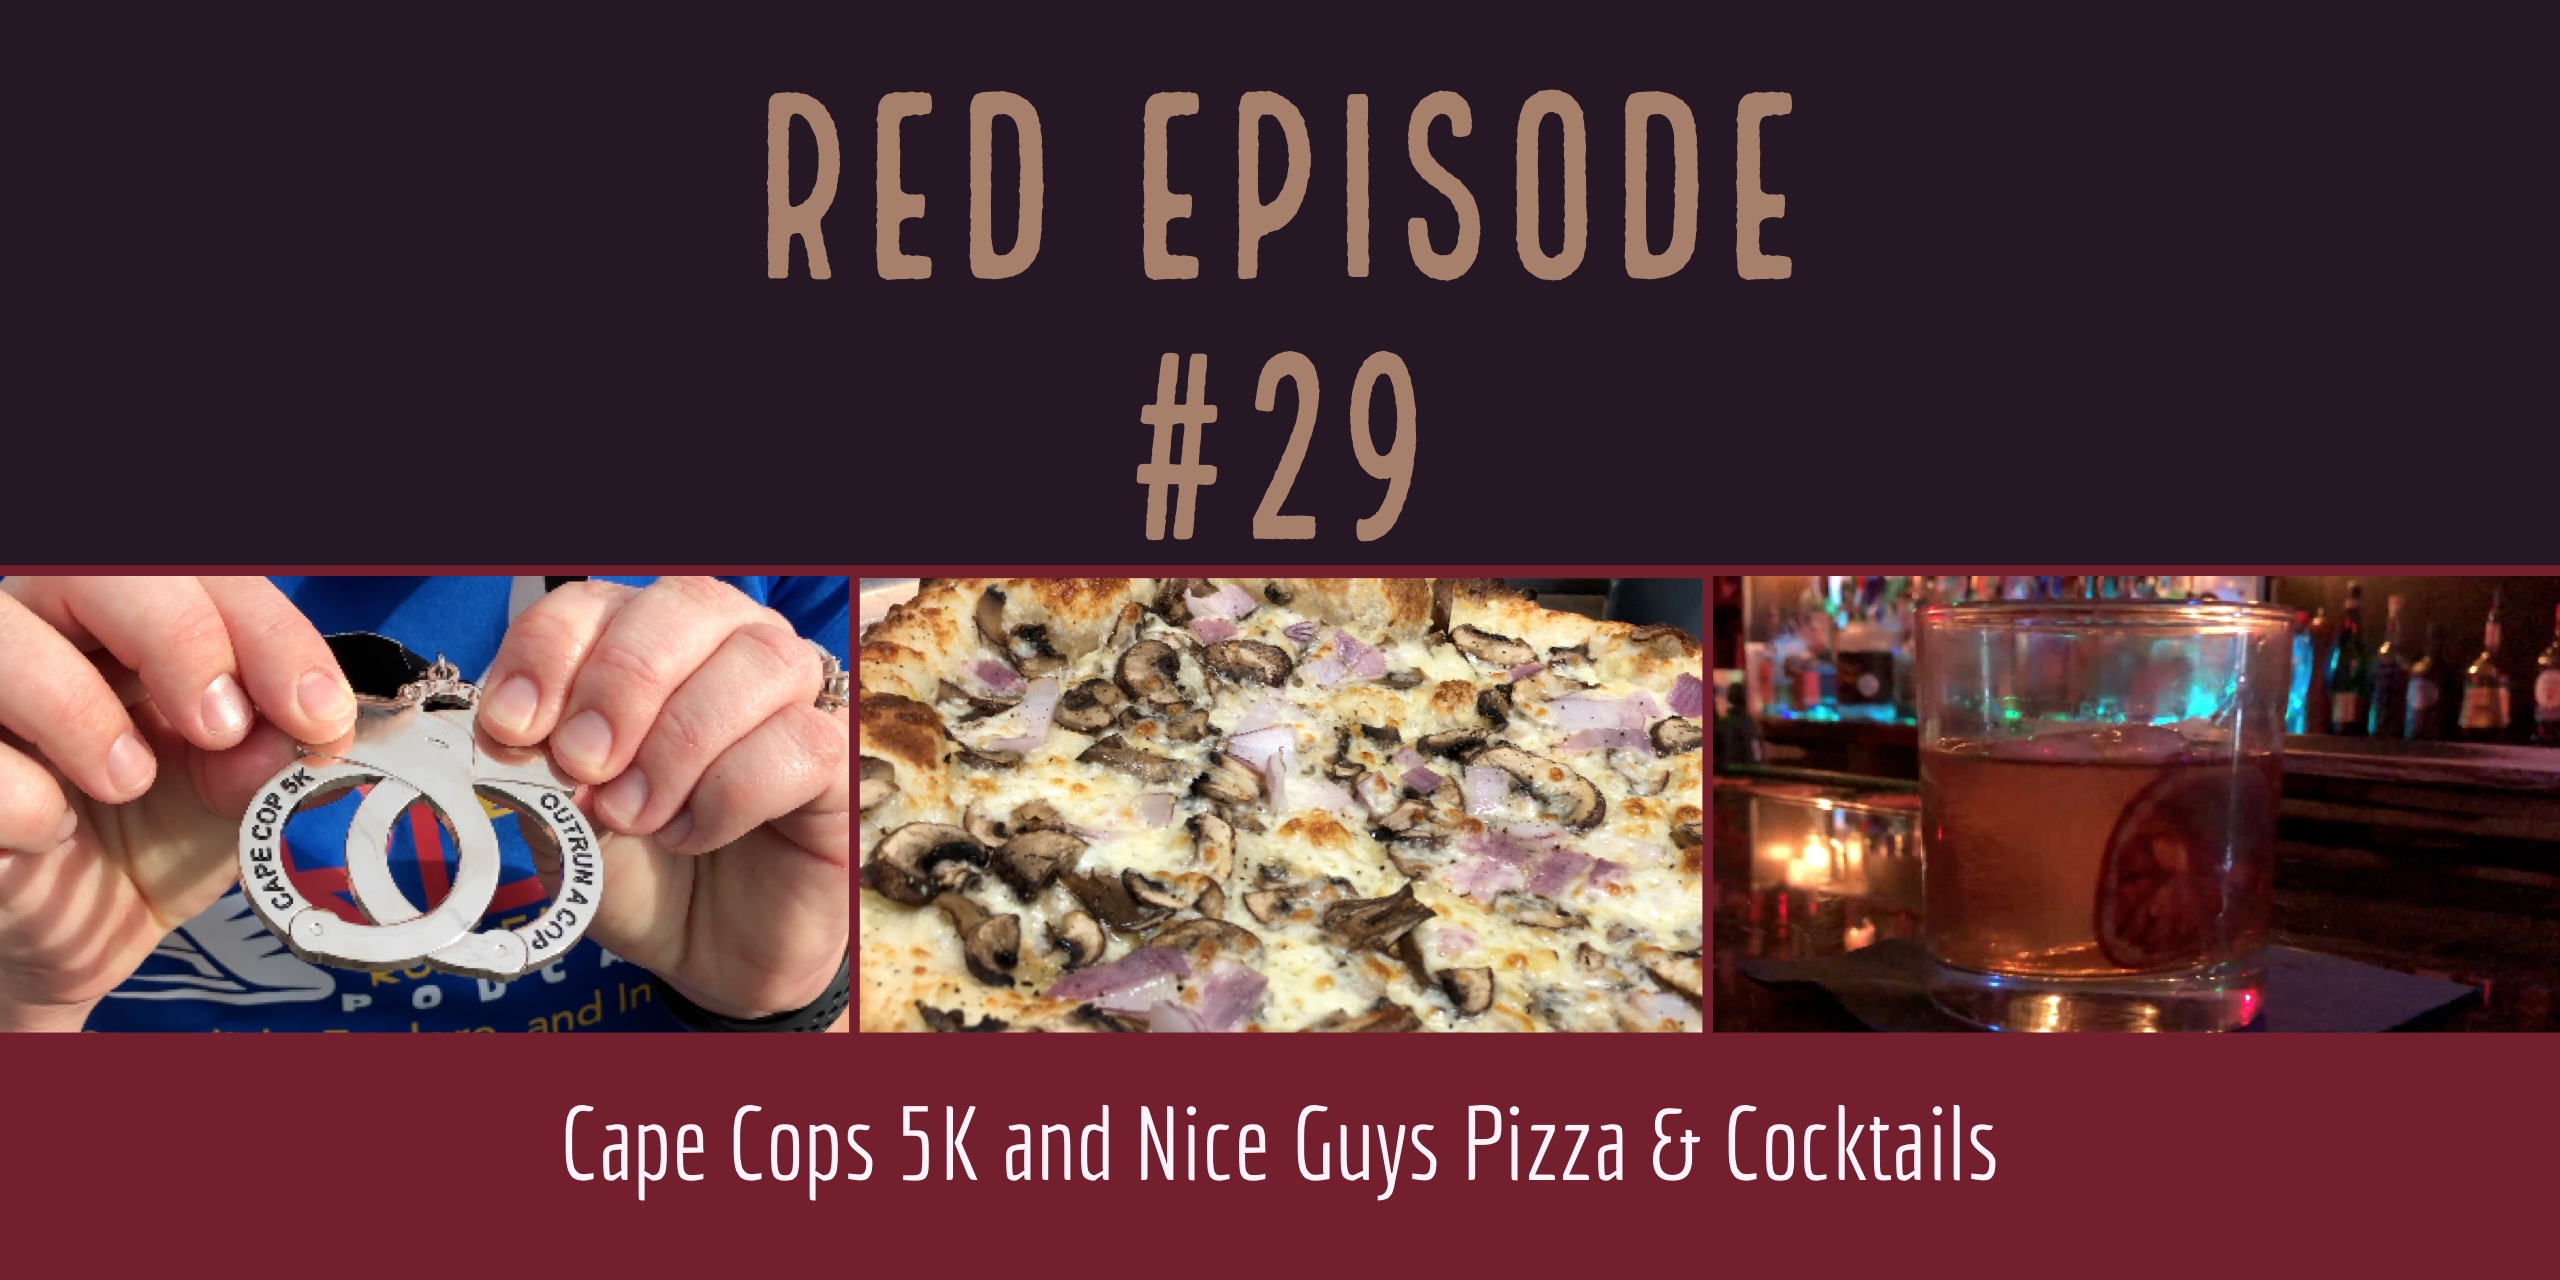 RED Episode #29:  Cape Cops 5K and Nice Guys Pizza & Cocktails